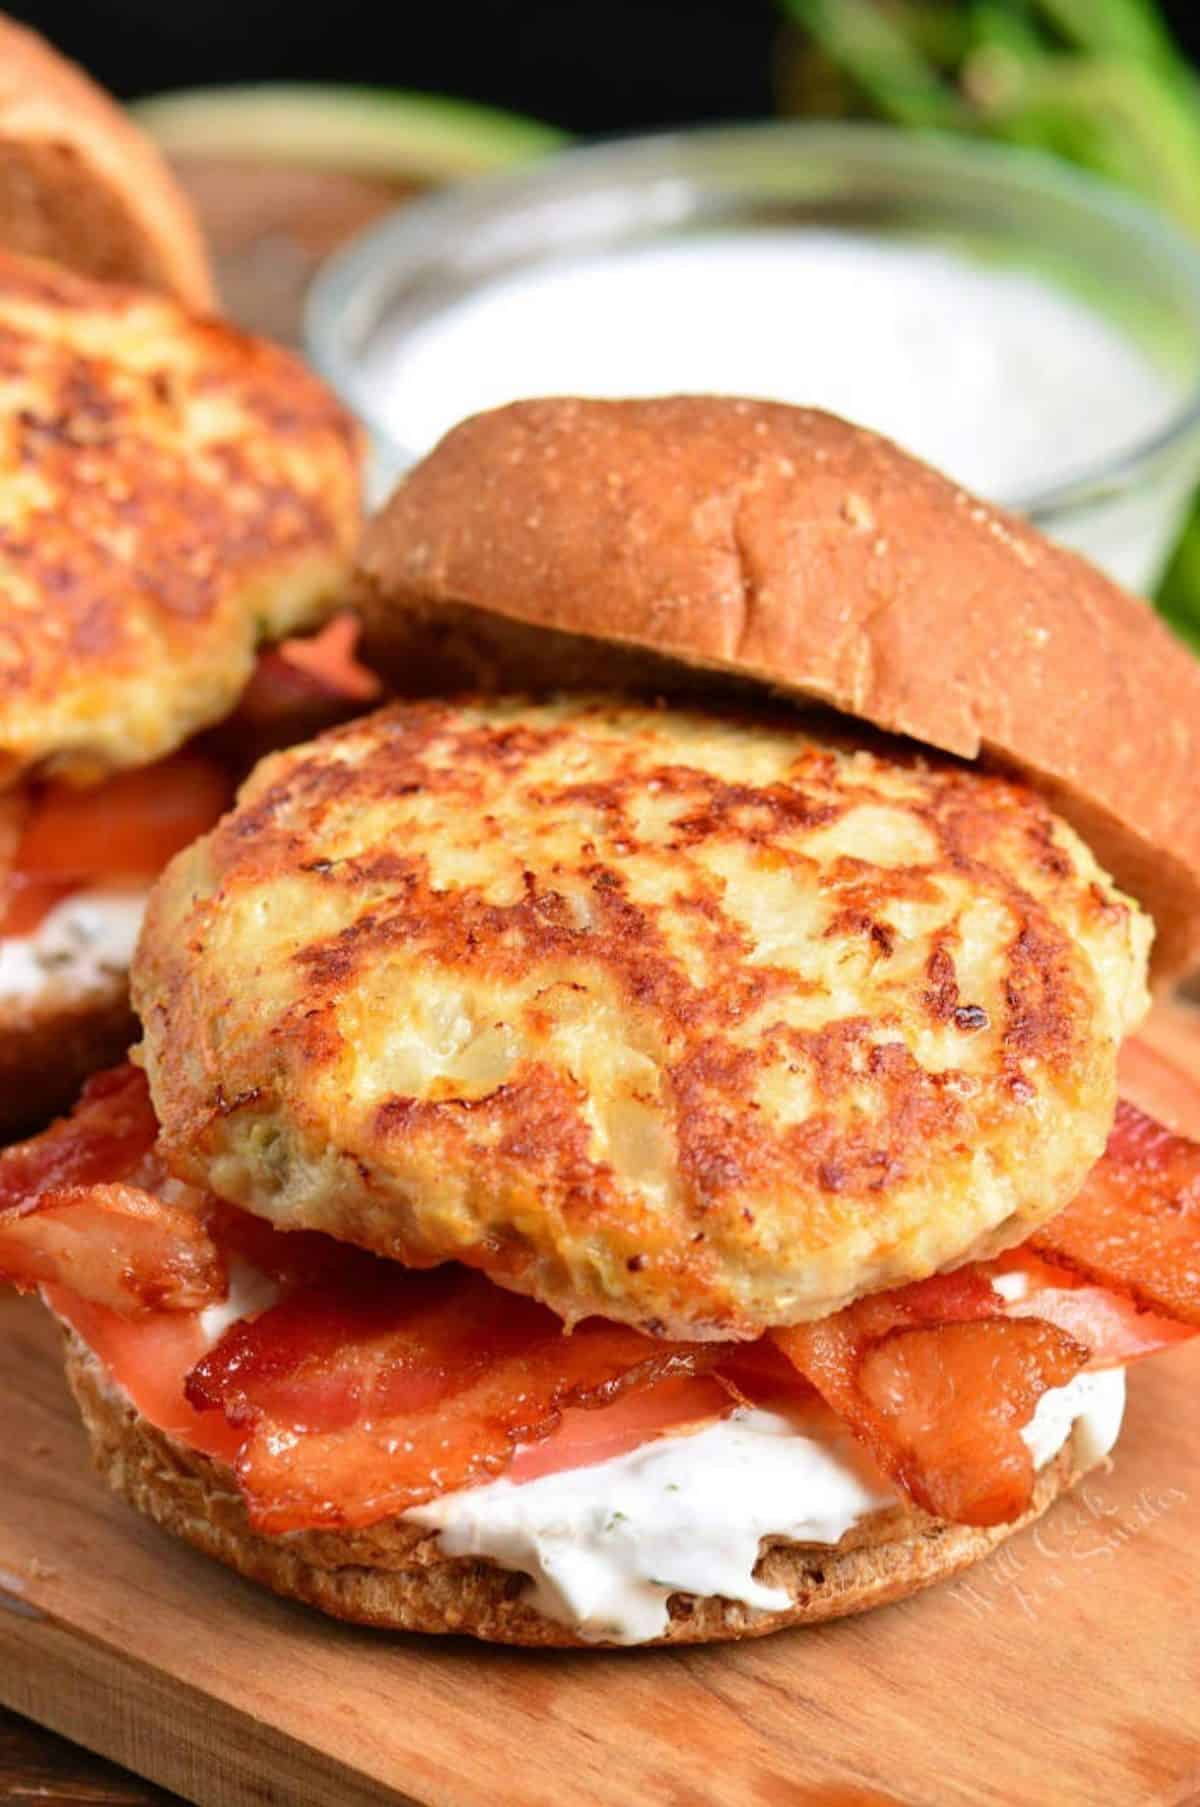 chicken burgers with bacon, tomato, and cream sauce on a bun.